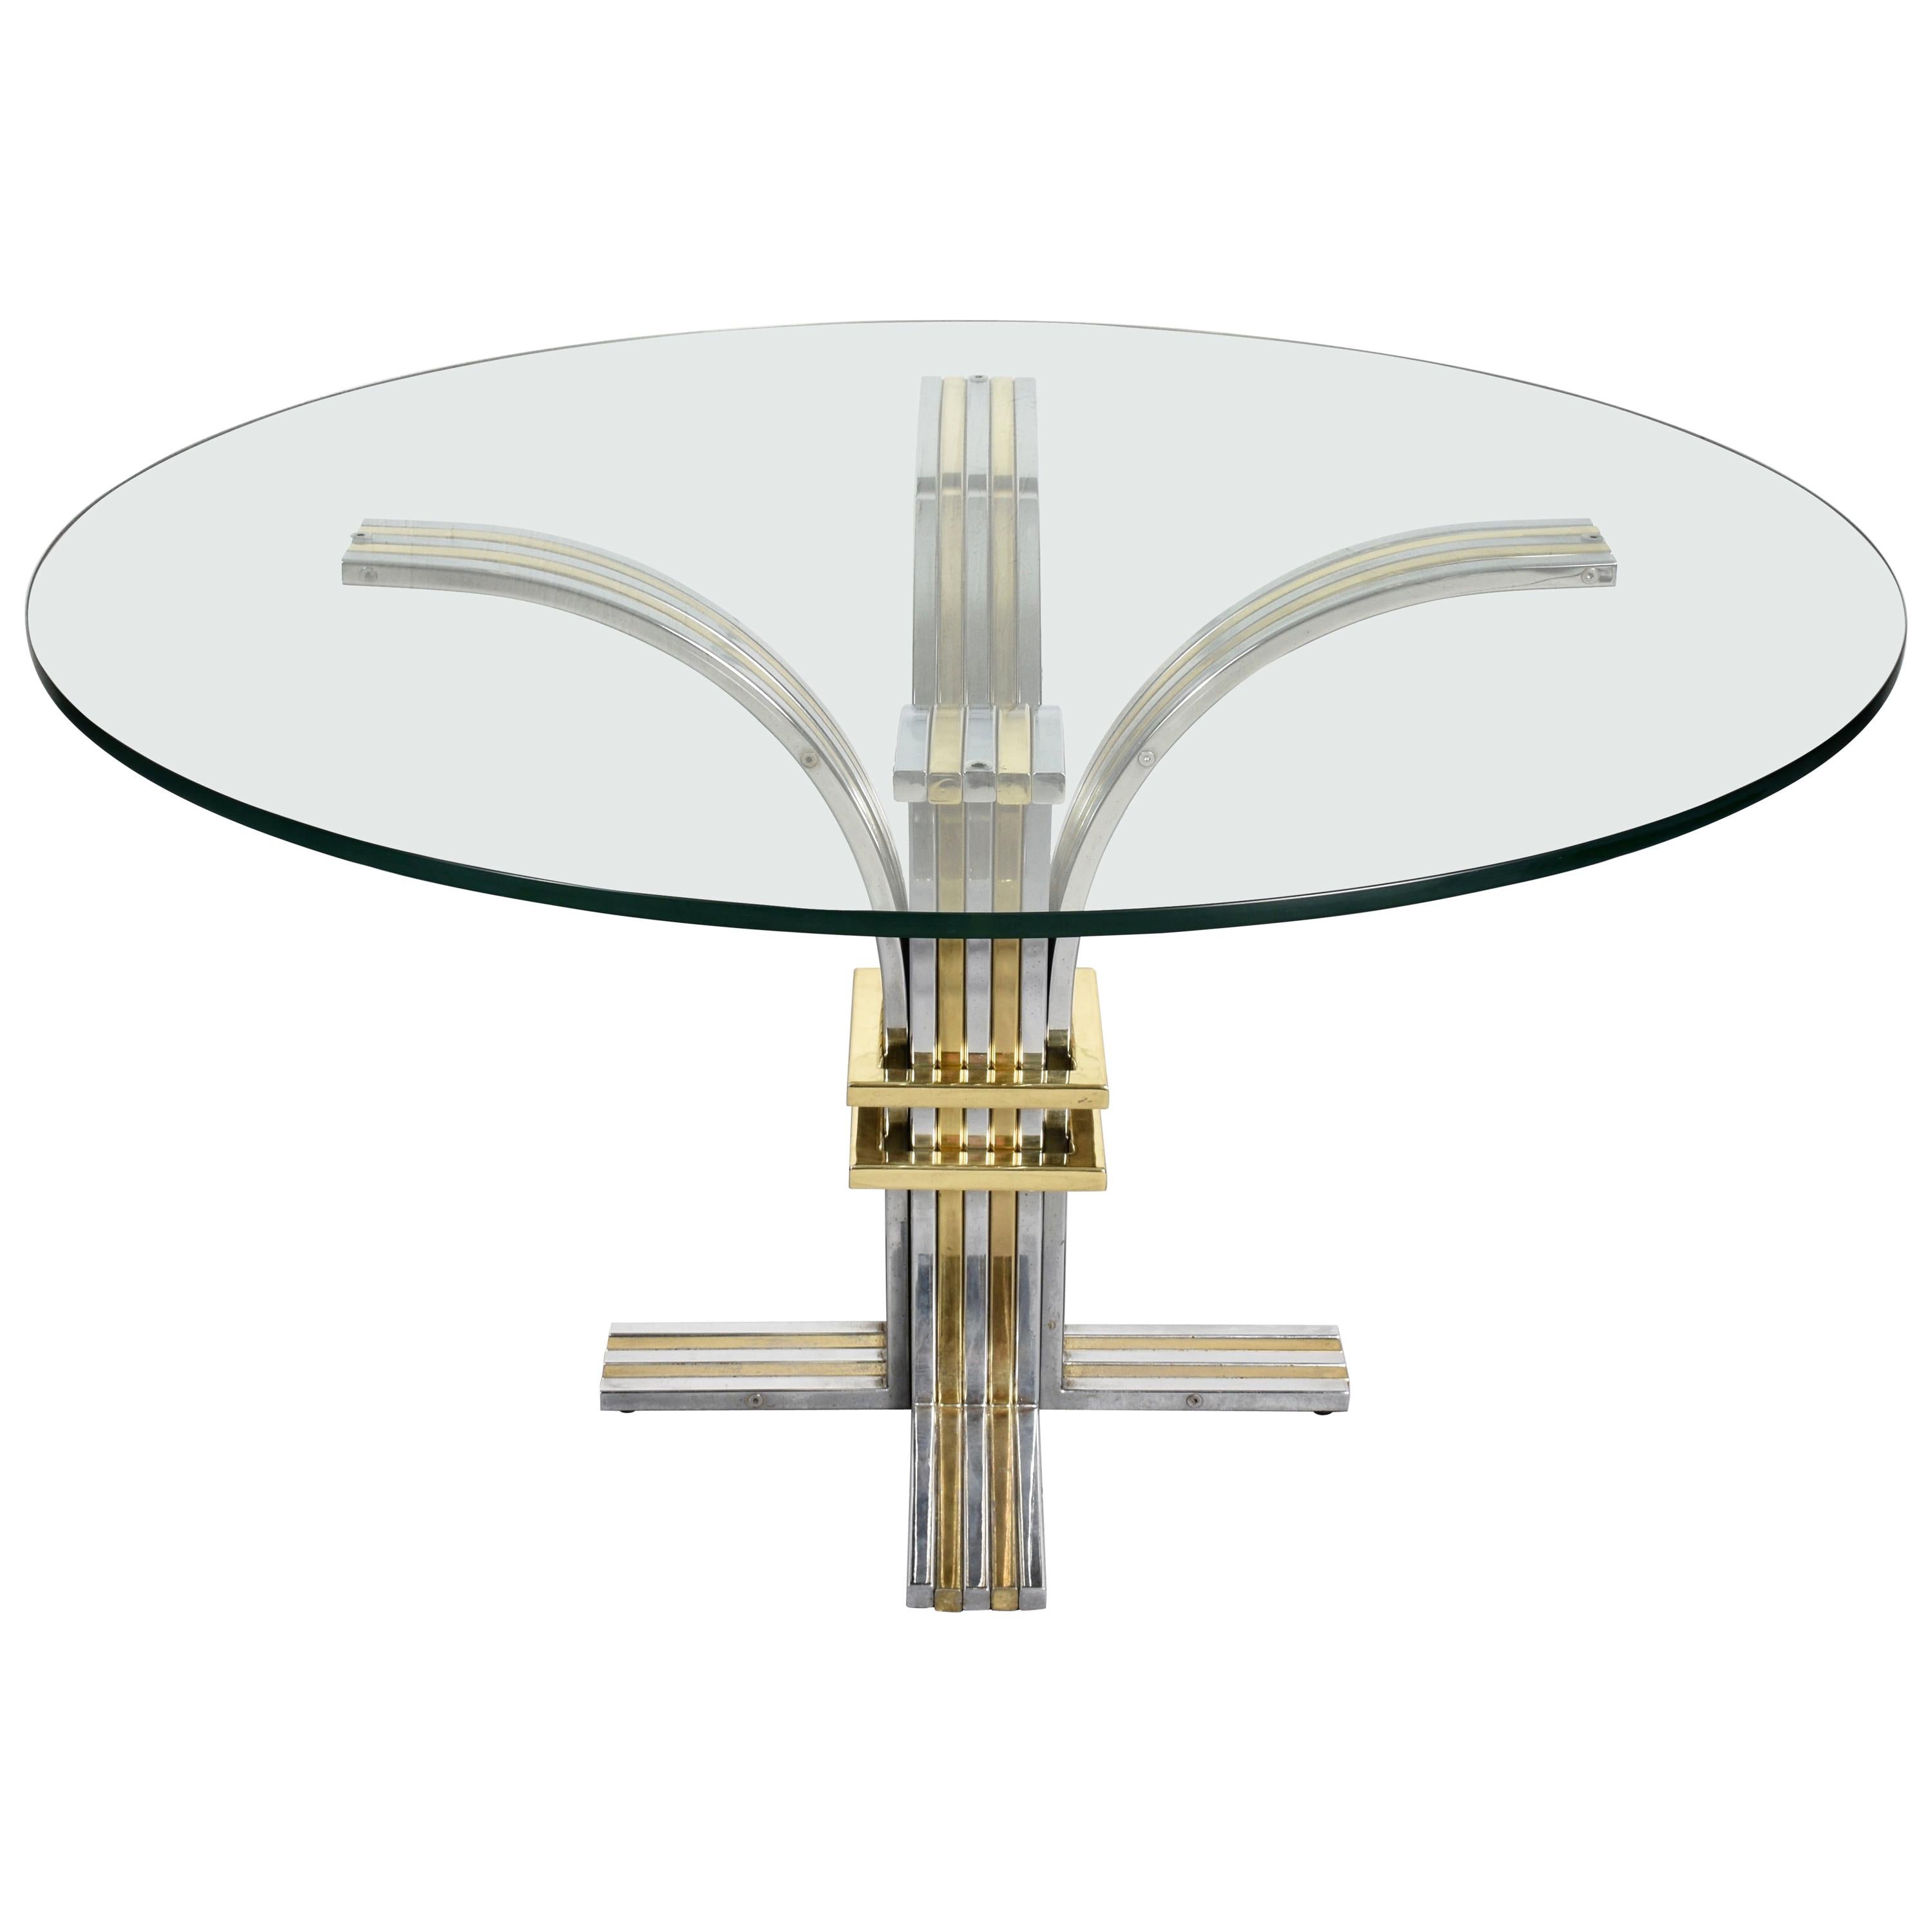 Brass and Chrome Steel Round Glass Italian Dining Table by Banci Firenze 1970s